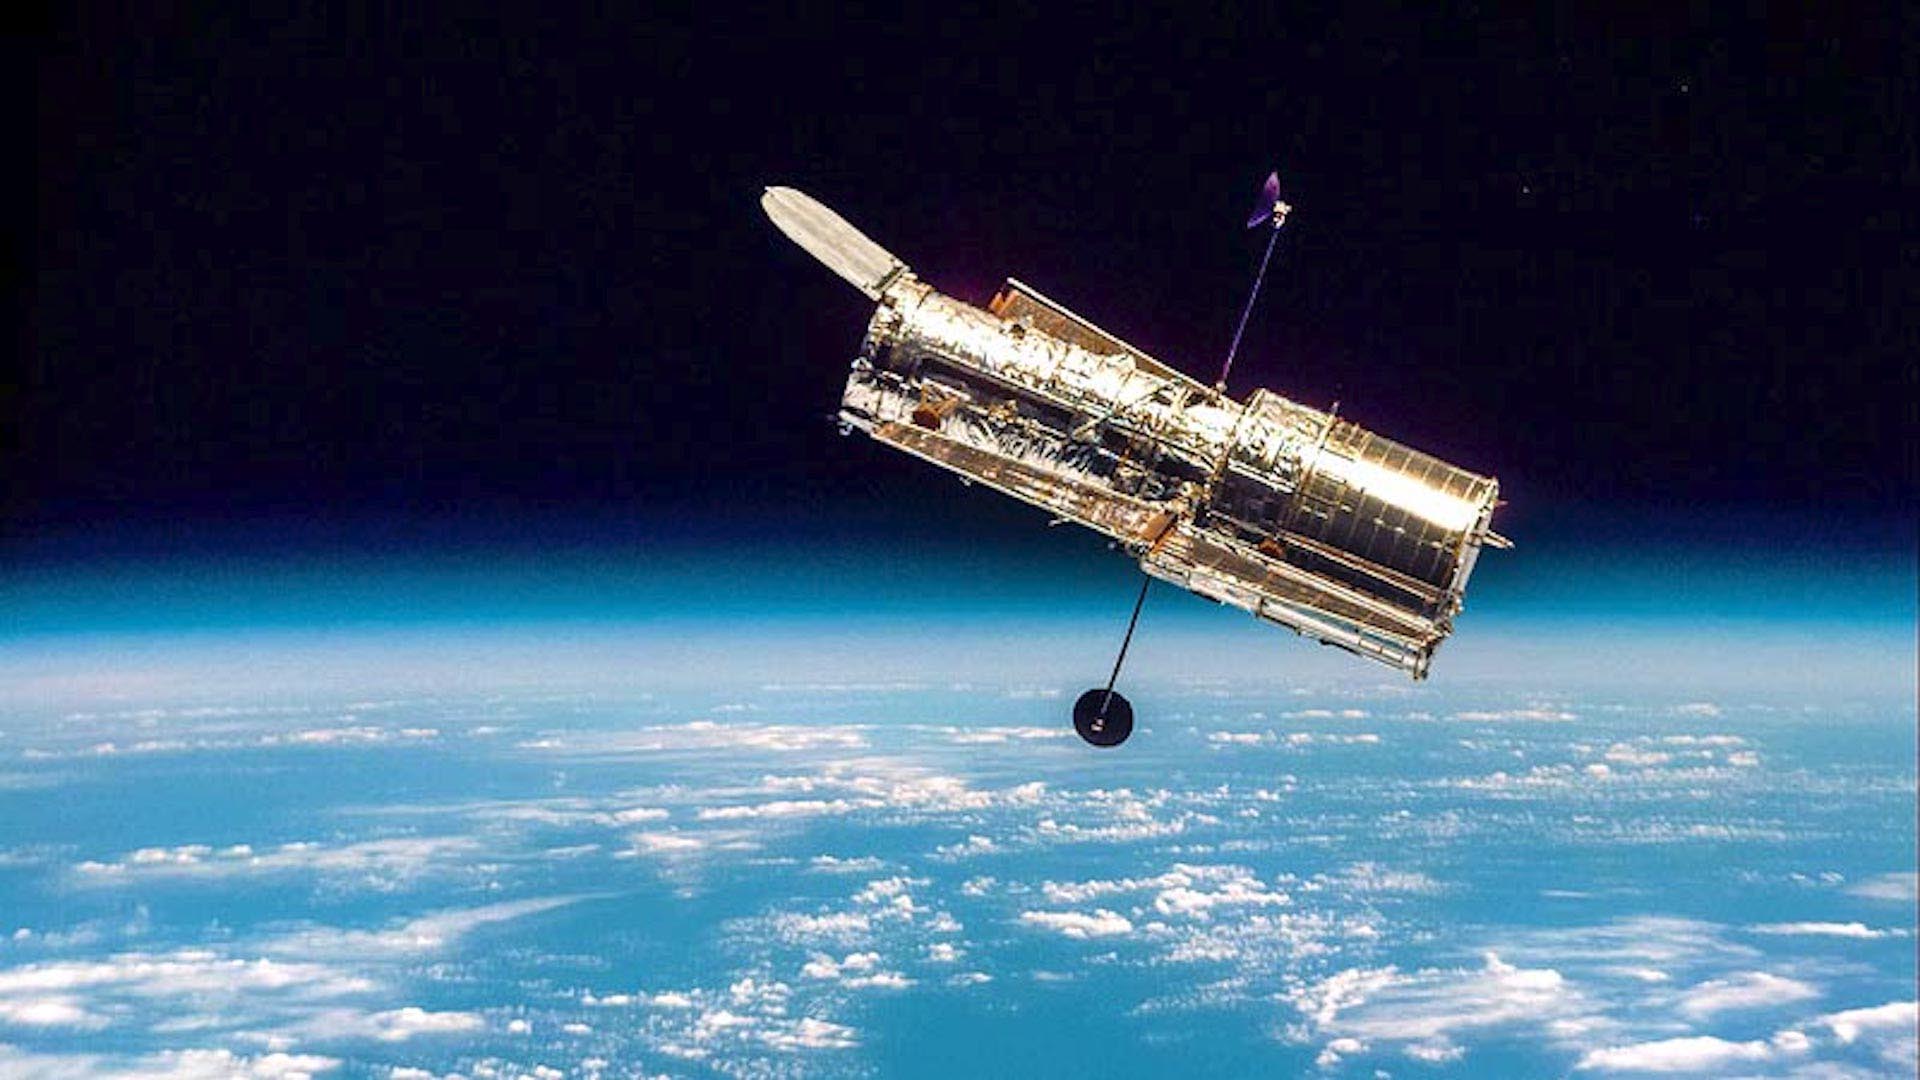 Hubble remains in safe mode after last failure